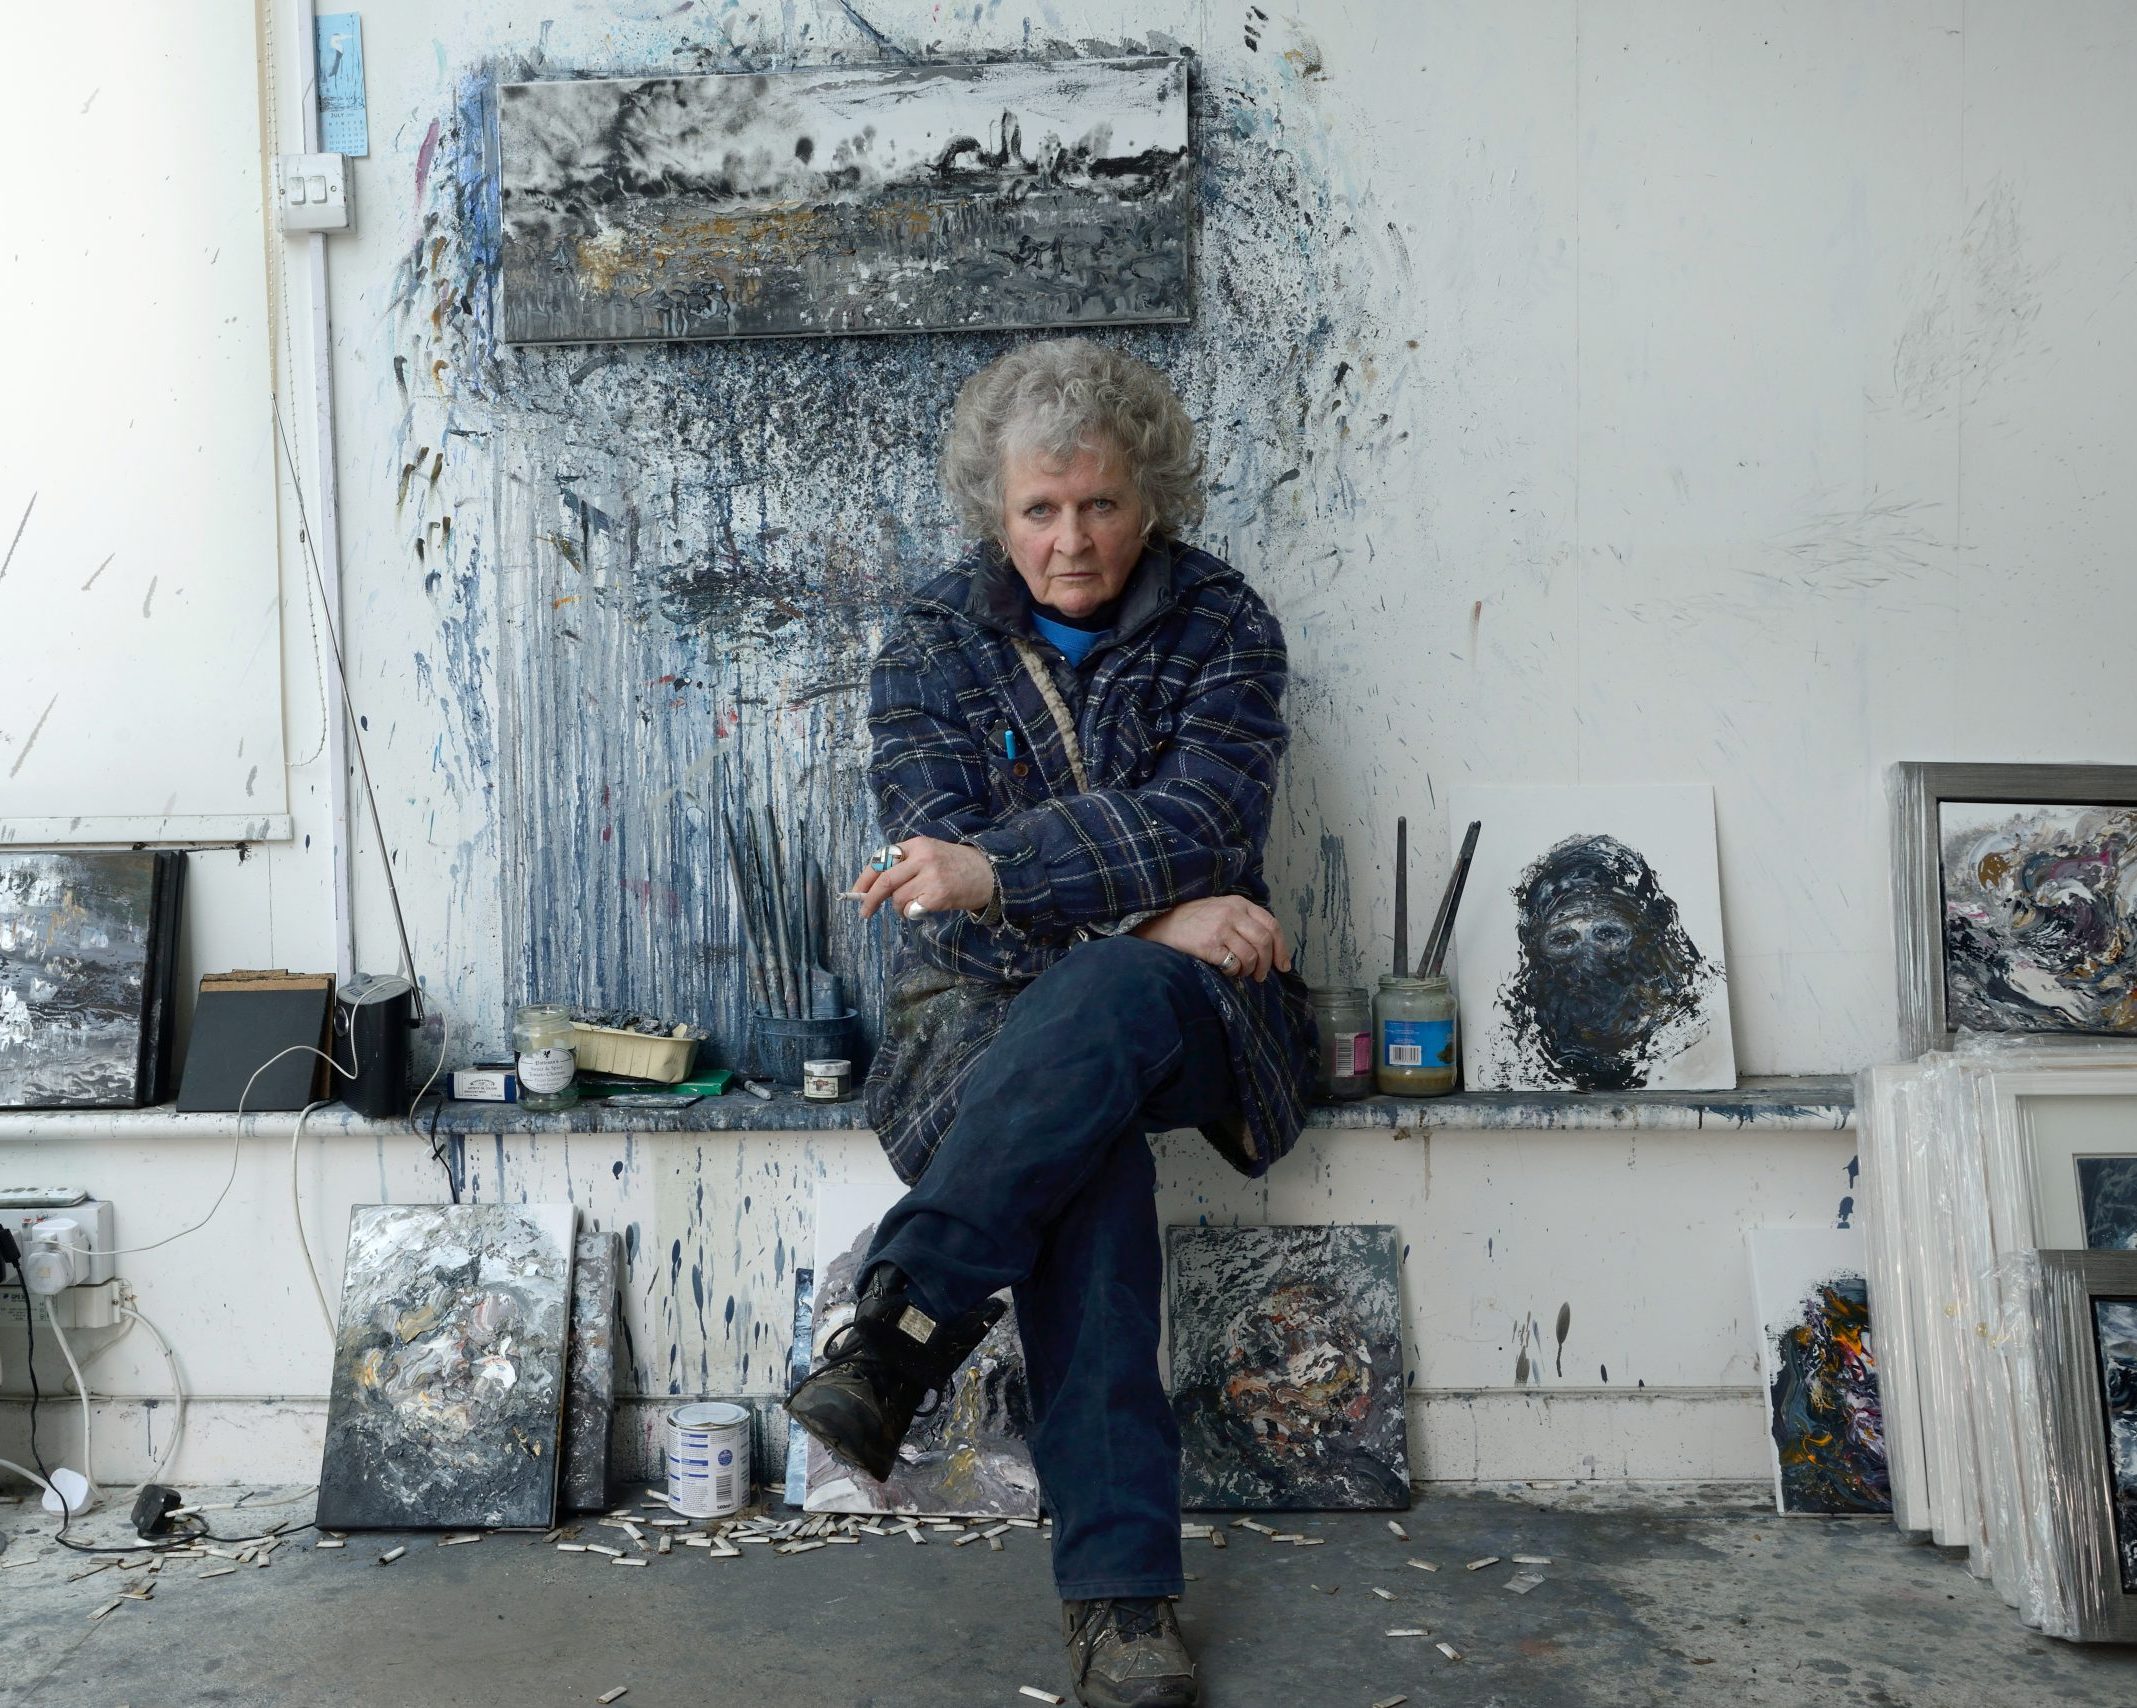 An image of the artist in their studio, Maggi Hambling. She has numerous cigarette butts around her while holding a lit cigarette in hand. Her expression is moody and stern.